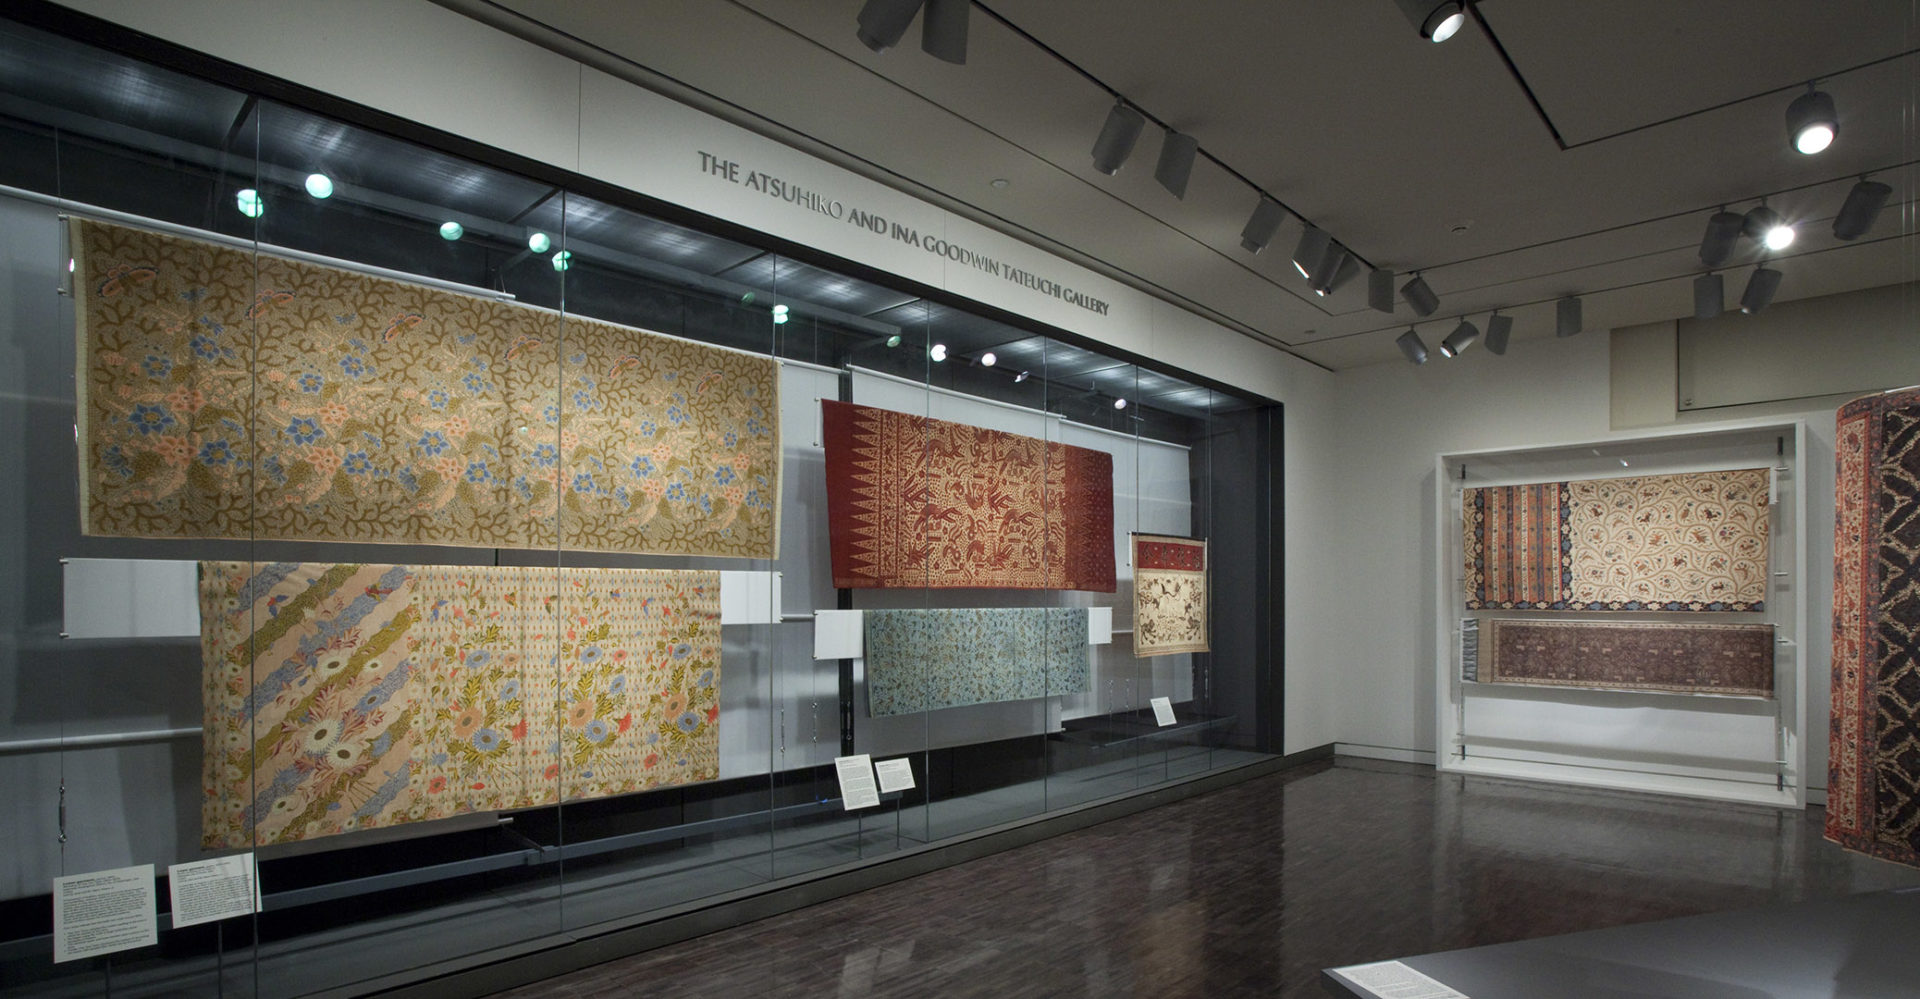 Batik - Textile Connections from China to Today - Smithsonian's National  Museum of Asian Art